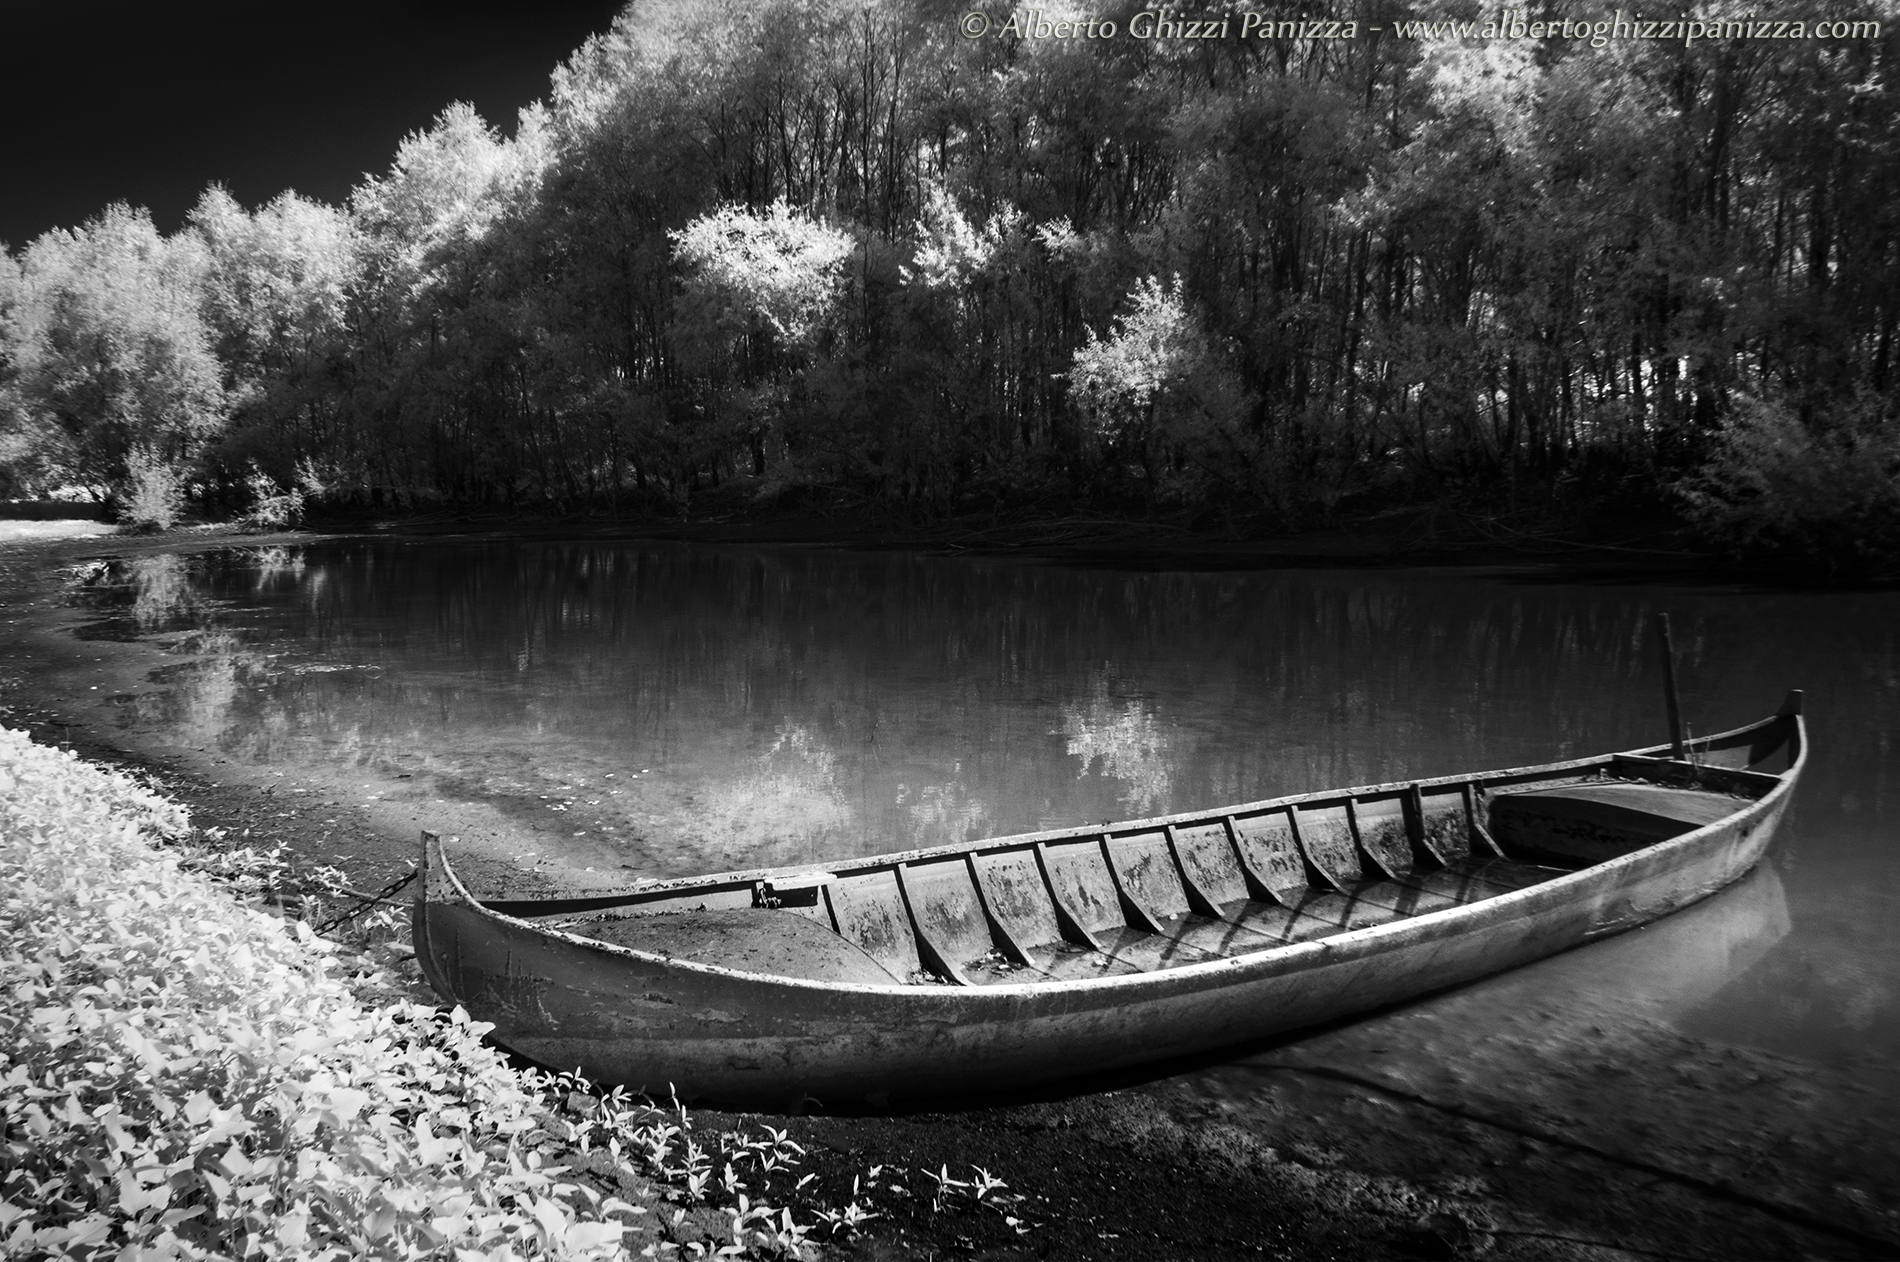 Boat in the flood plain...